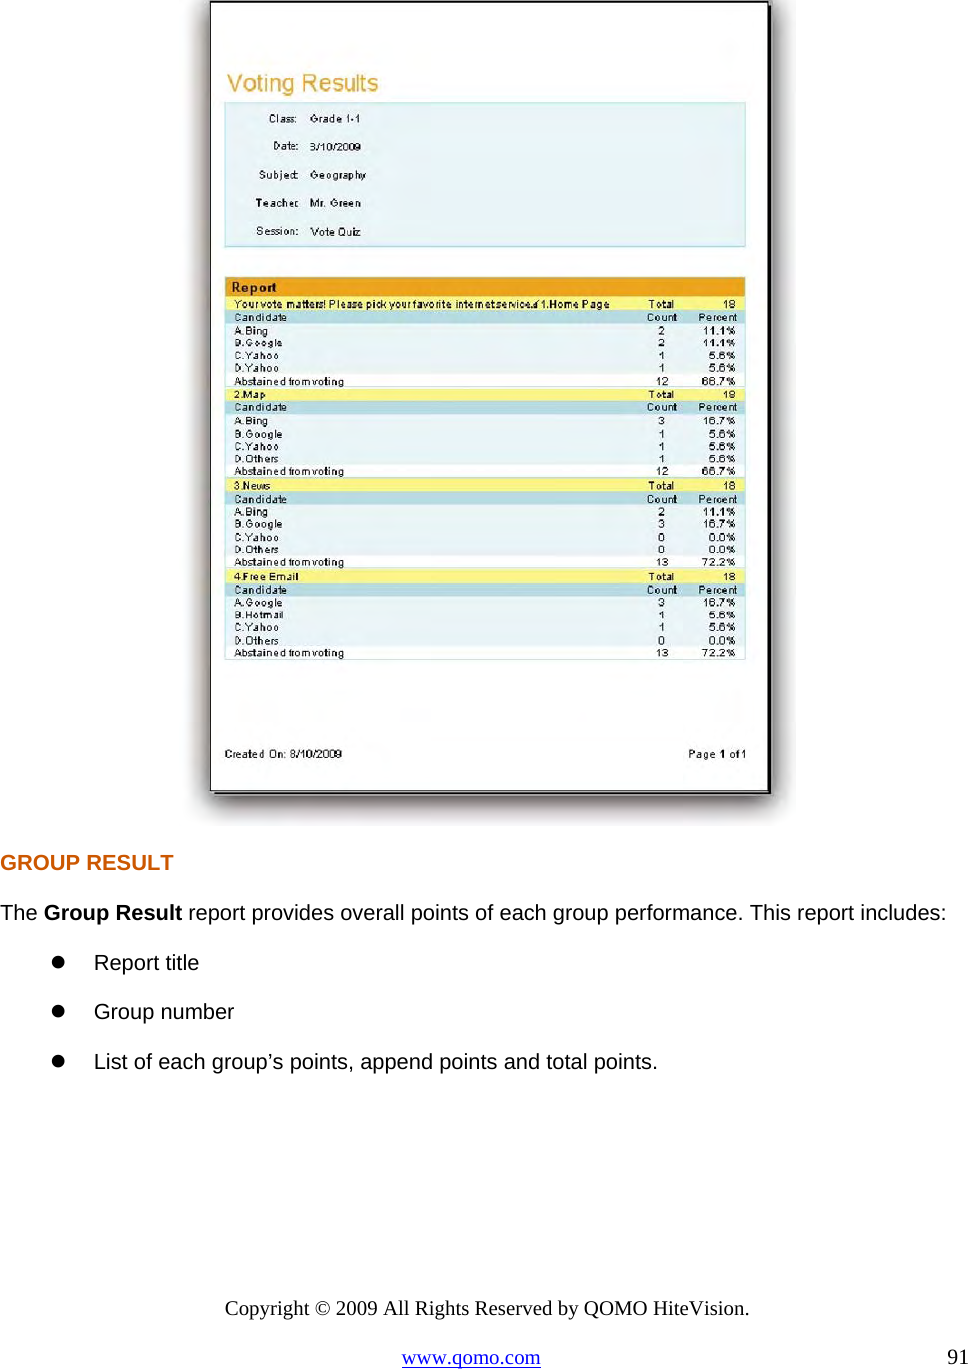 Copyright © 2009 All Rights Reserved by QOMO HiteVision. www.qomo.com                                                                          91   GROUP RESULT The Group Result report provides overall points of each group performance. This report includes:   Report title   Group number   List of each group’s points, append points and total points. 